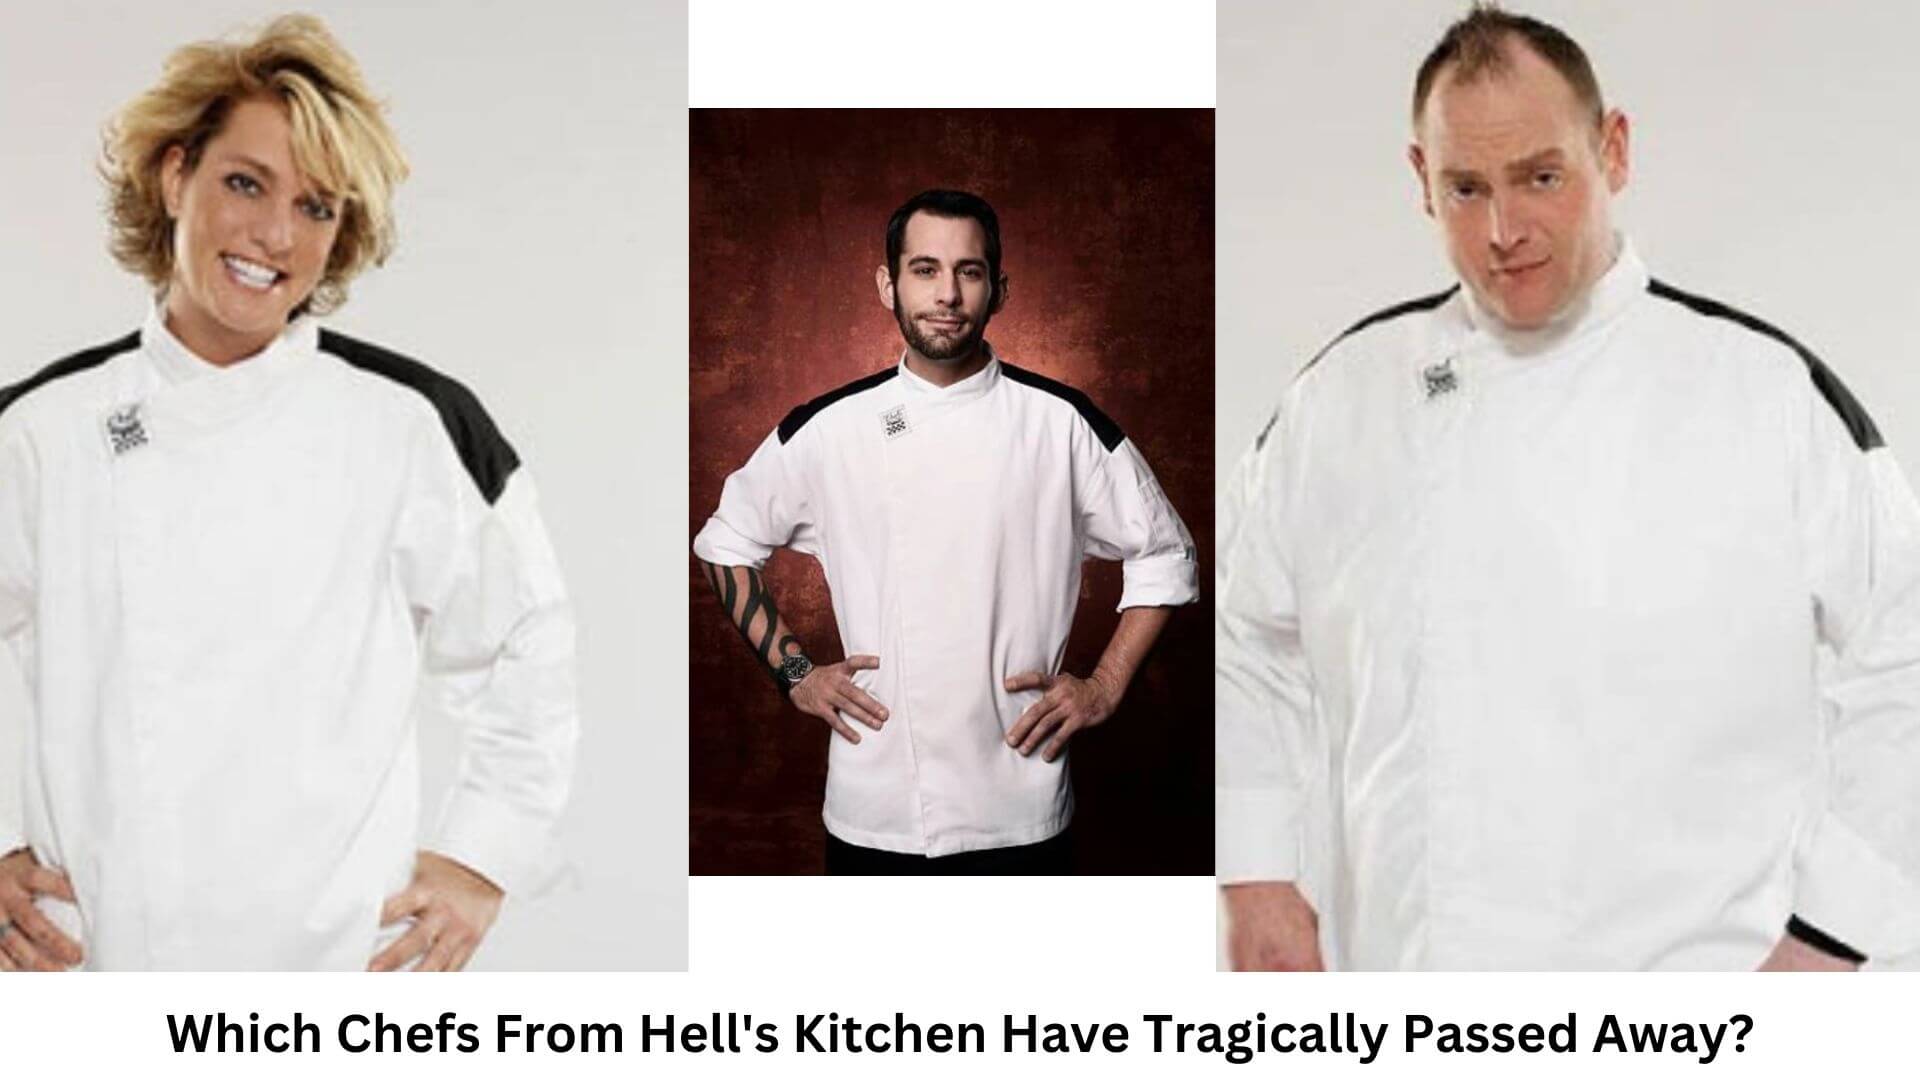 Which Chefs From Hell's Kitchen Have Tragically Passed Away